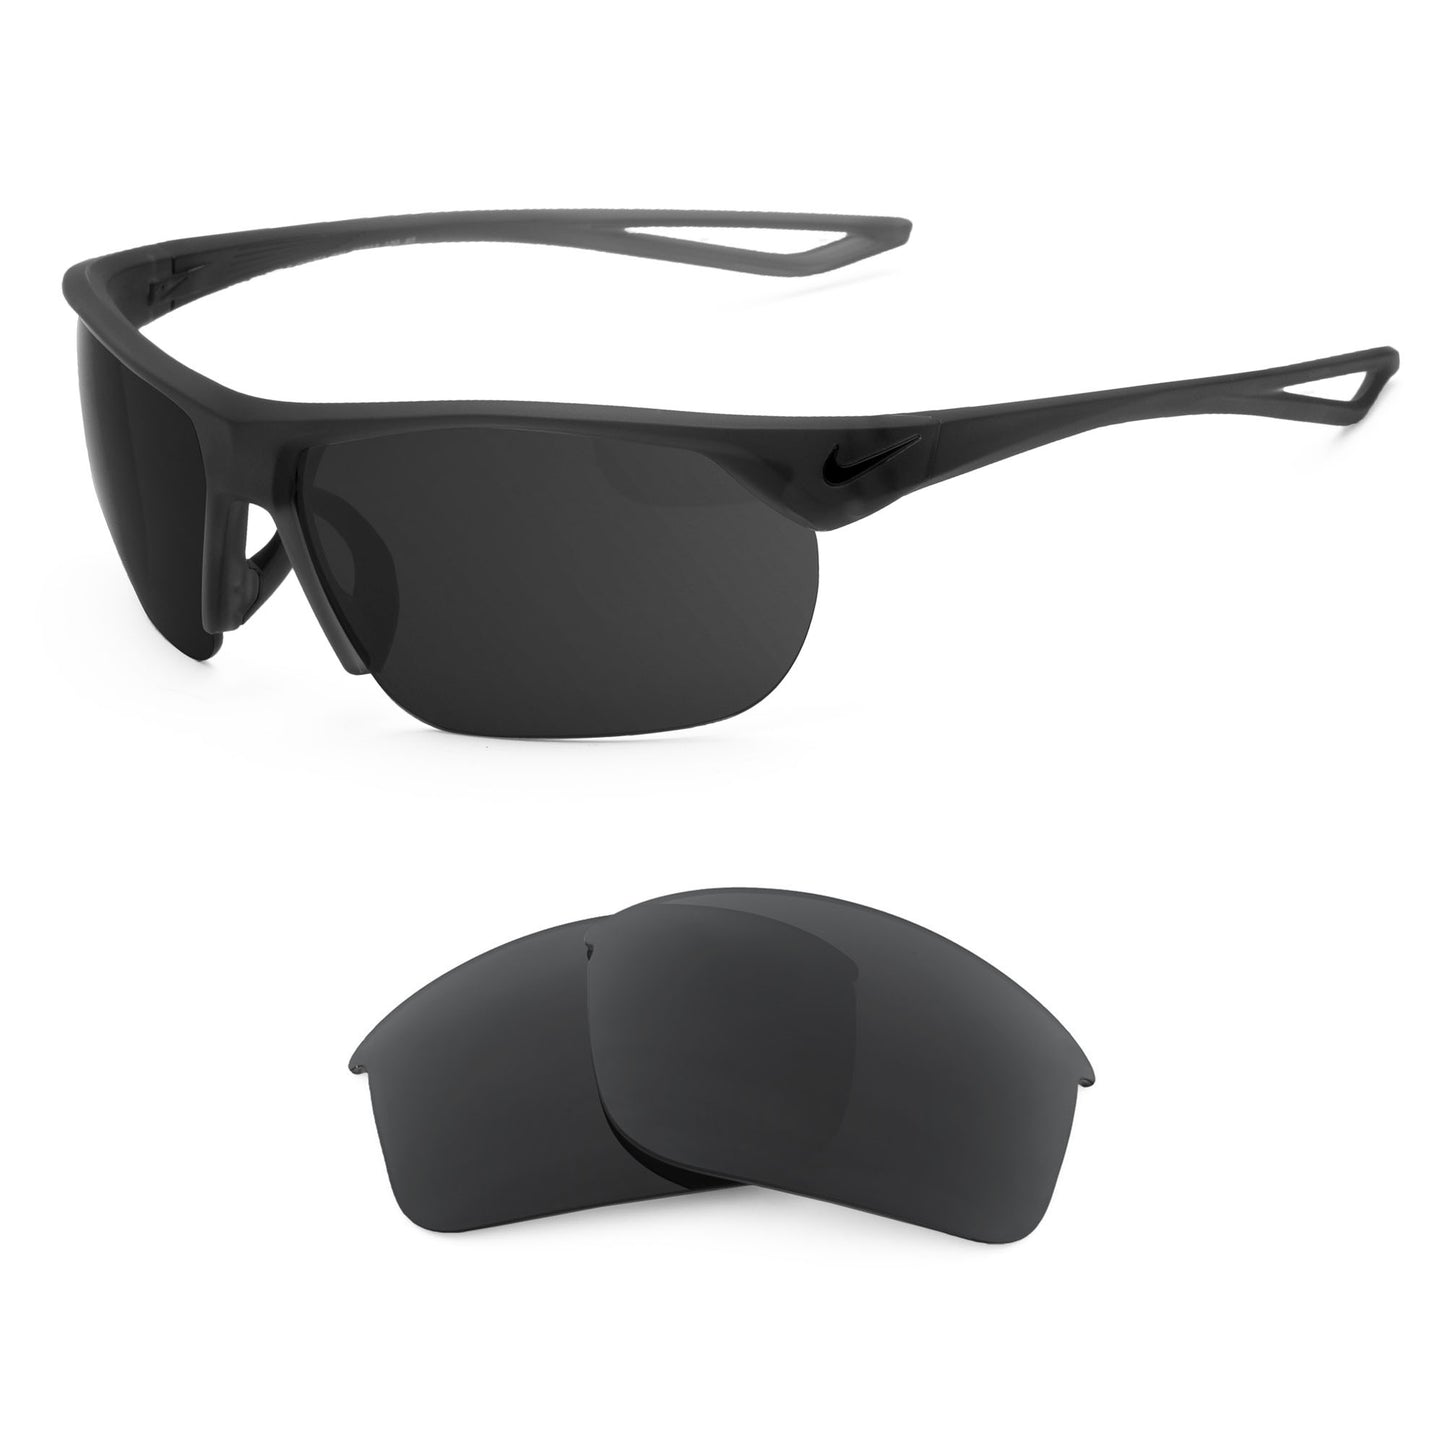 Nike Trainer S sunglasses with replacement lenses